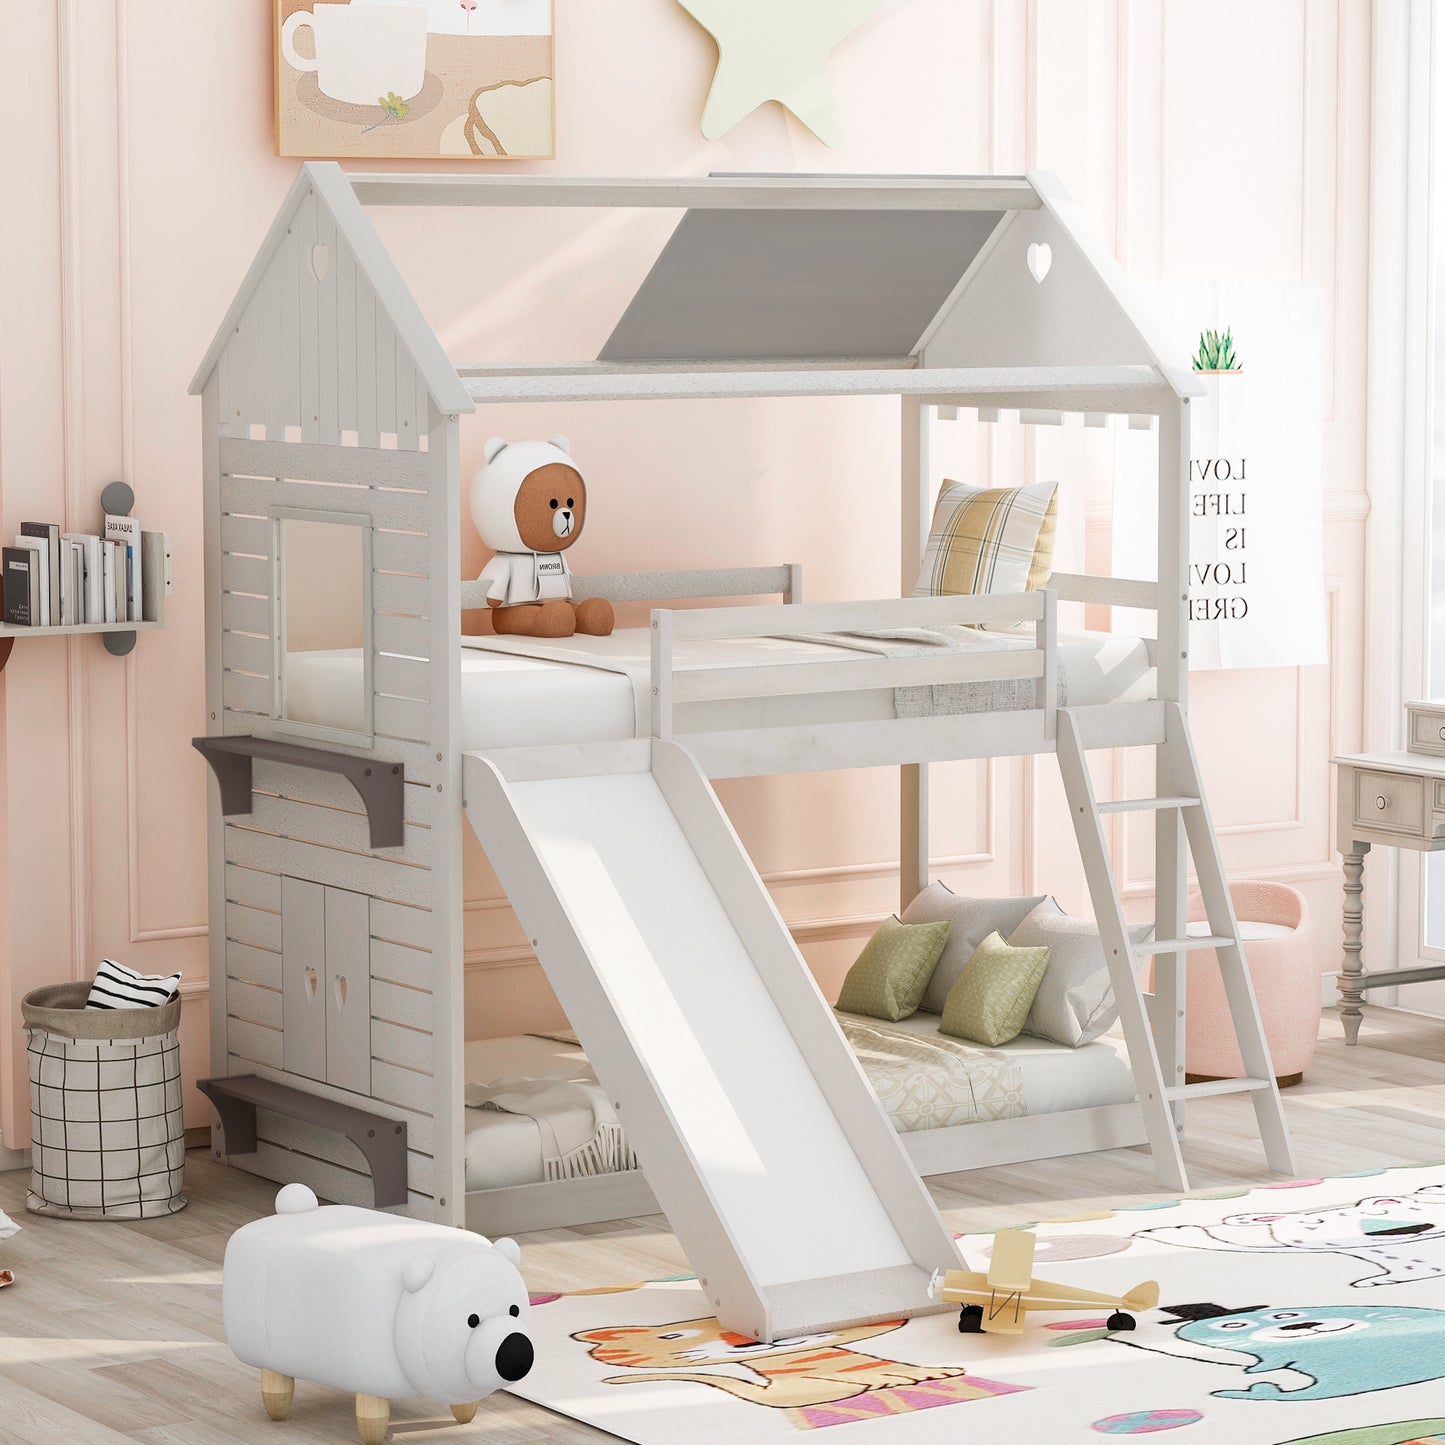 Twin Playhouse Bunk Bed with Unique Design